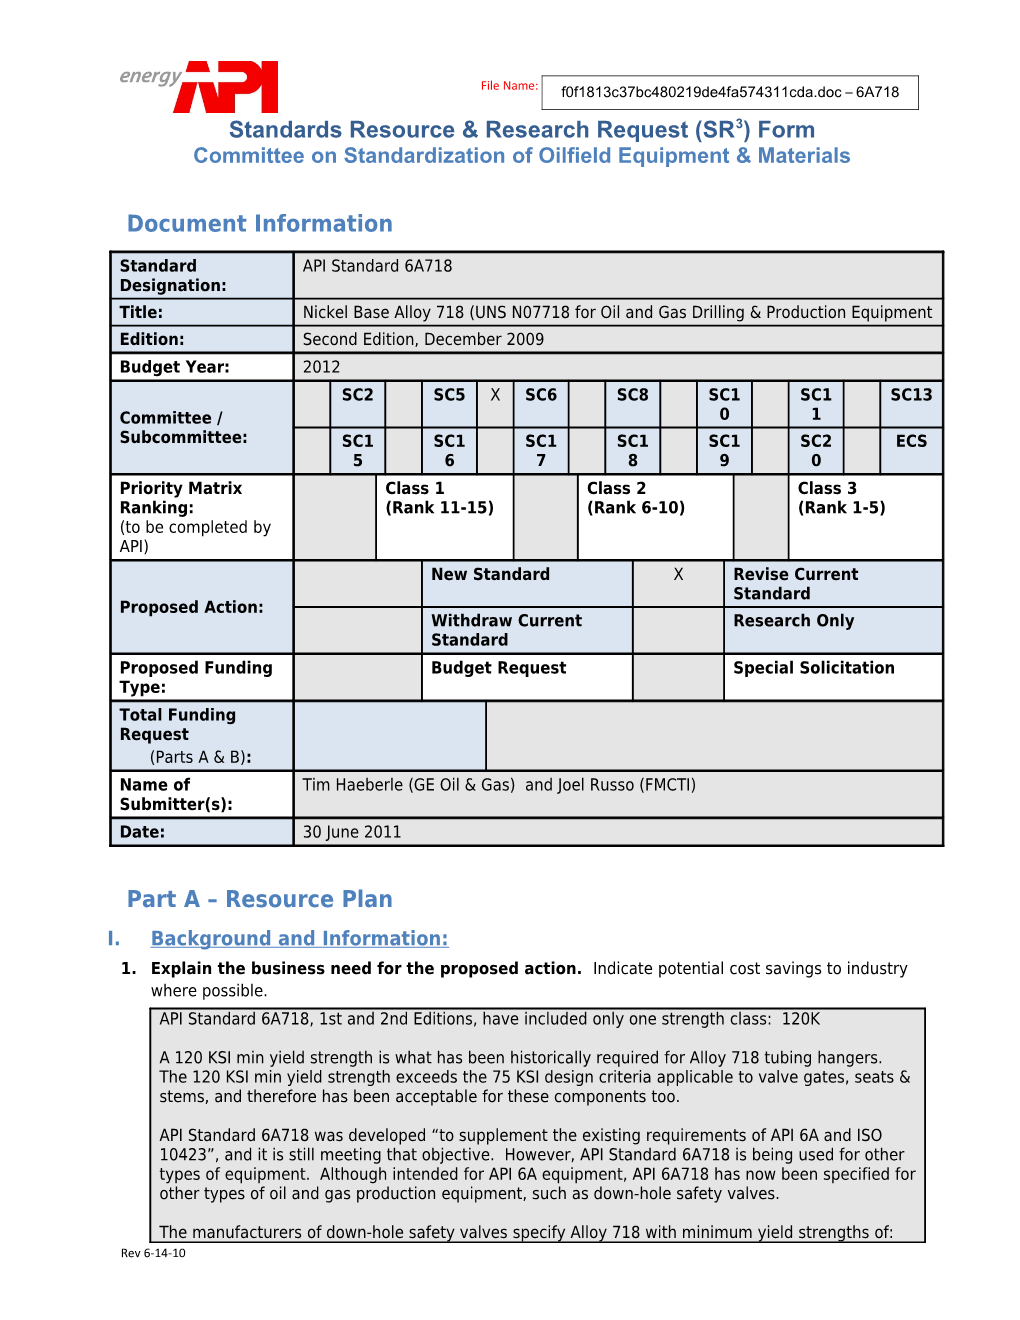 Standards Resource & Research Request (SR3) Form